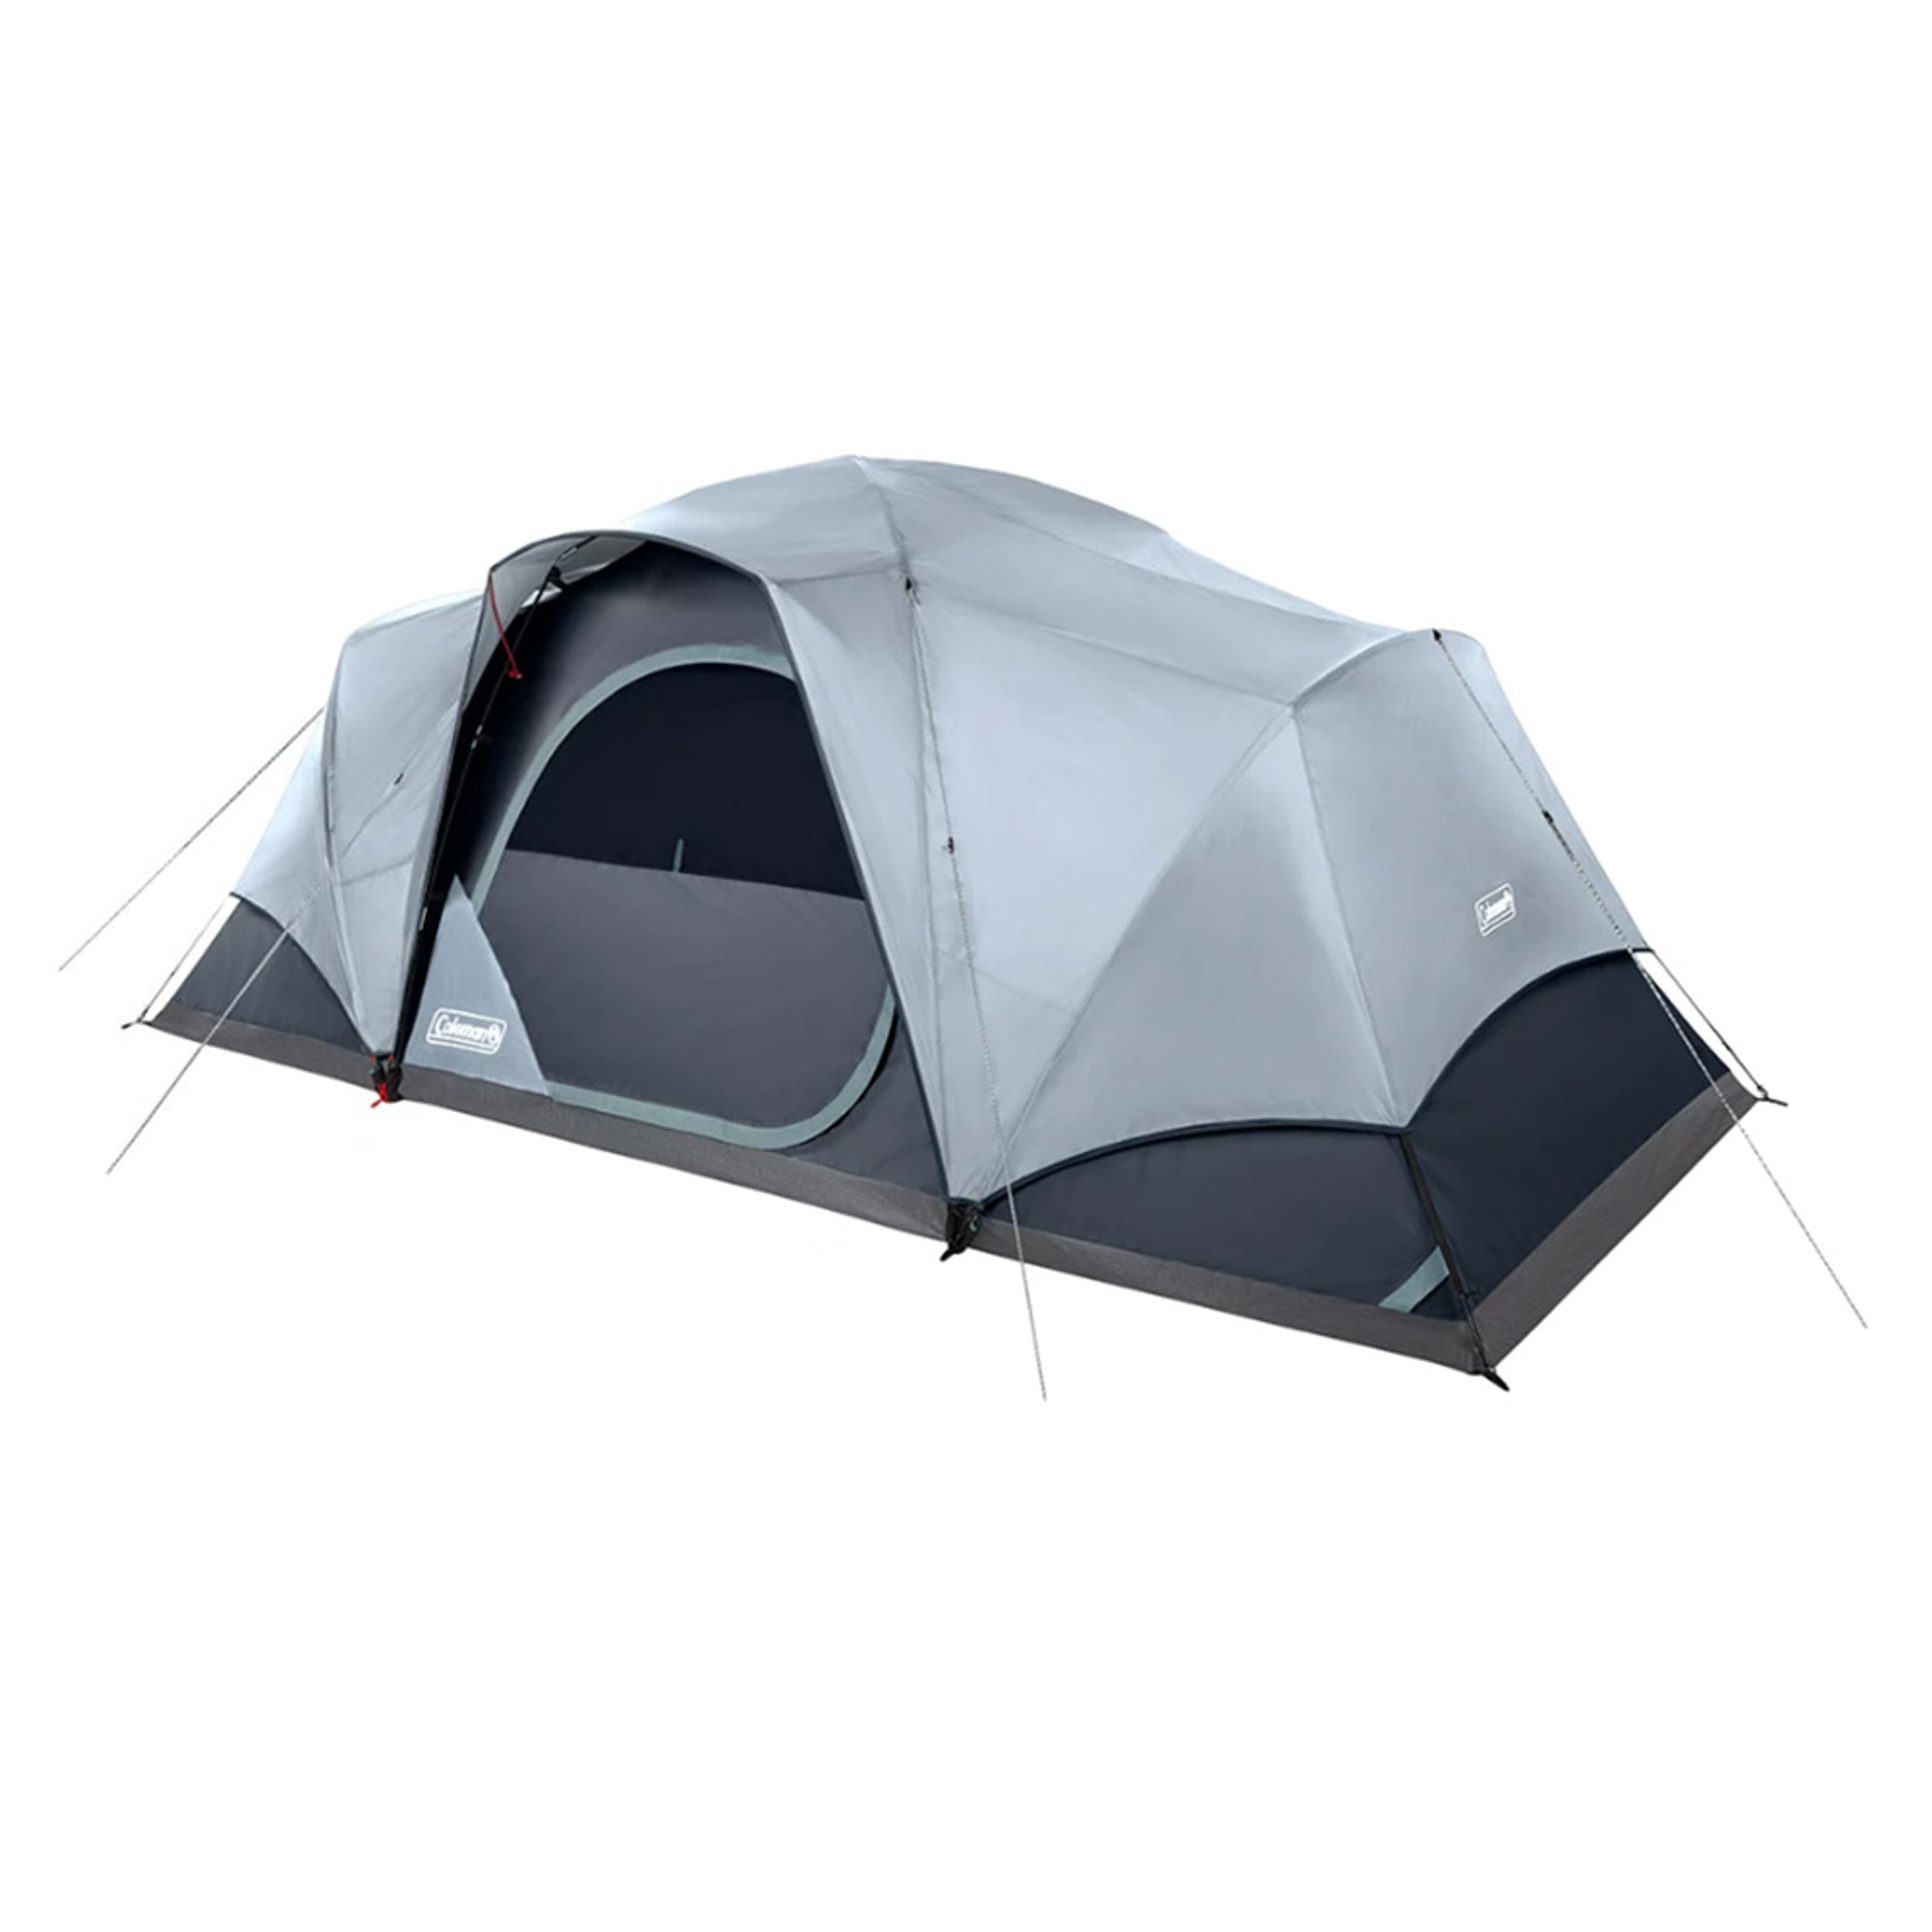 Coleman Skydome XL 8-Person Camping Tent w/LED Lighting